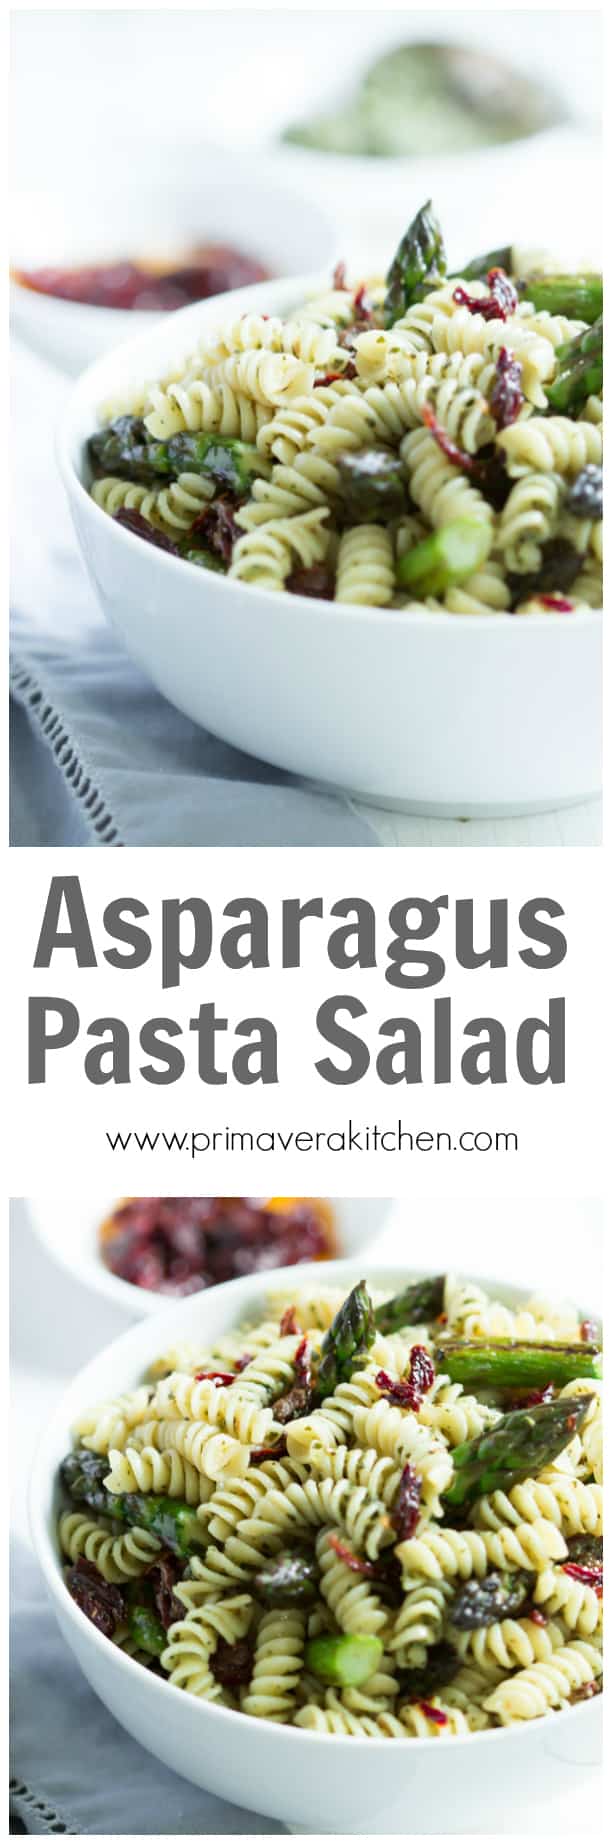 Easy Asparagus Pasta Salad - This Easy Asparagus Pasta Salad only requires 5-ingrediten and it is gluten-free, quick to make and it is perfect to make ahead on the weekend and take to work all week. 